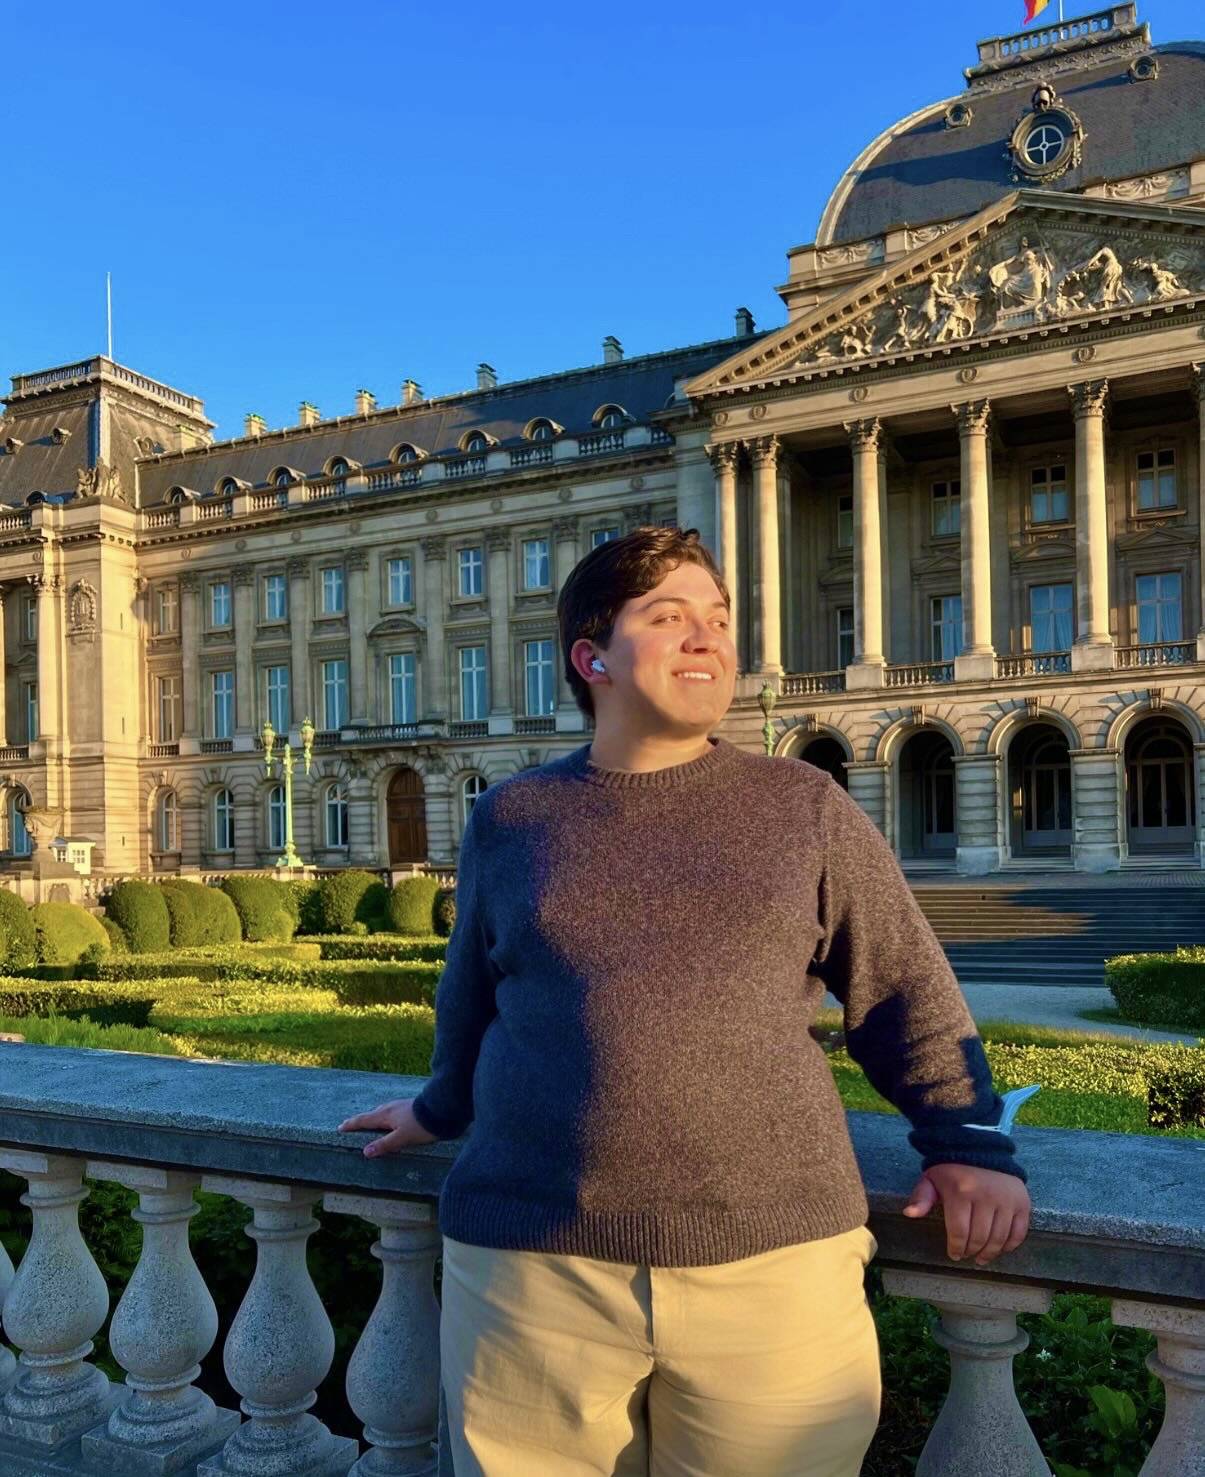 Daniel at the Royal Palace in Brussels